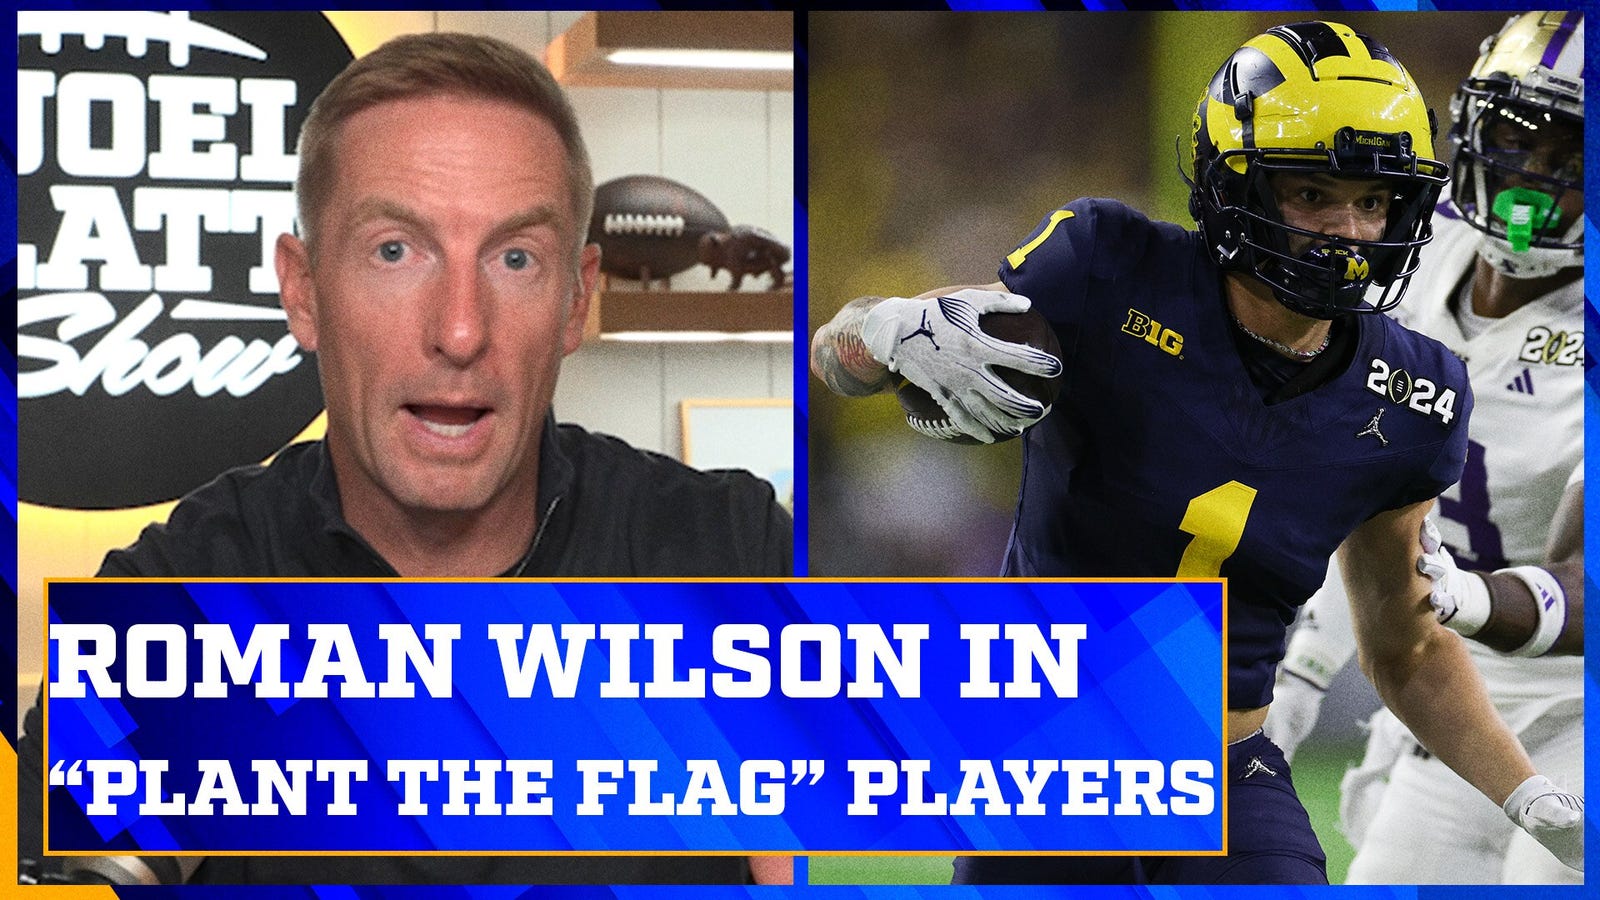 Beryl TV c49i07a1mzyts6md Roman Wilson: 'Wouldn't be surprised' if Jim Harbaugh drafts '5 or 6' Michigan players Sports 